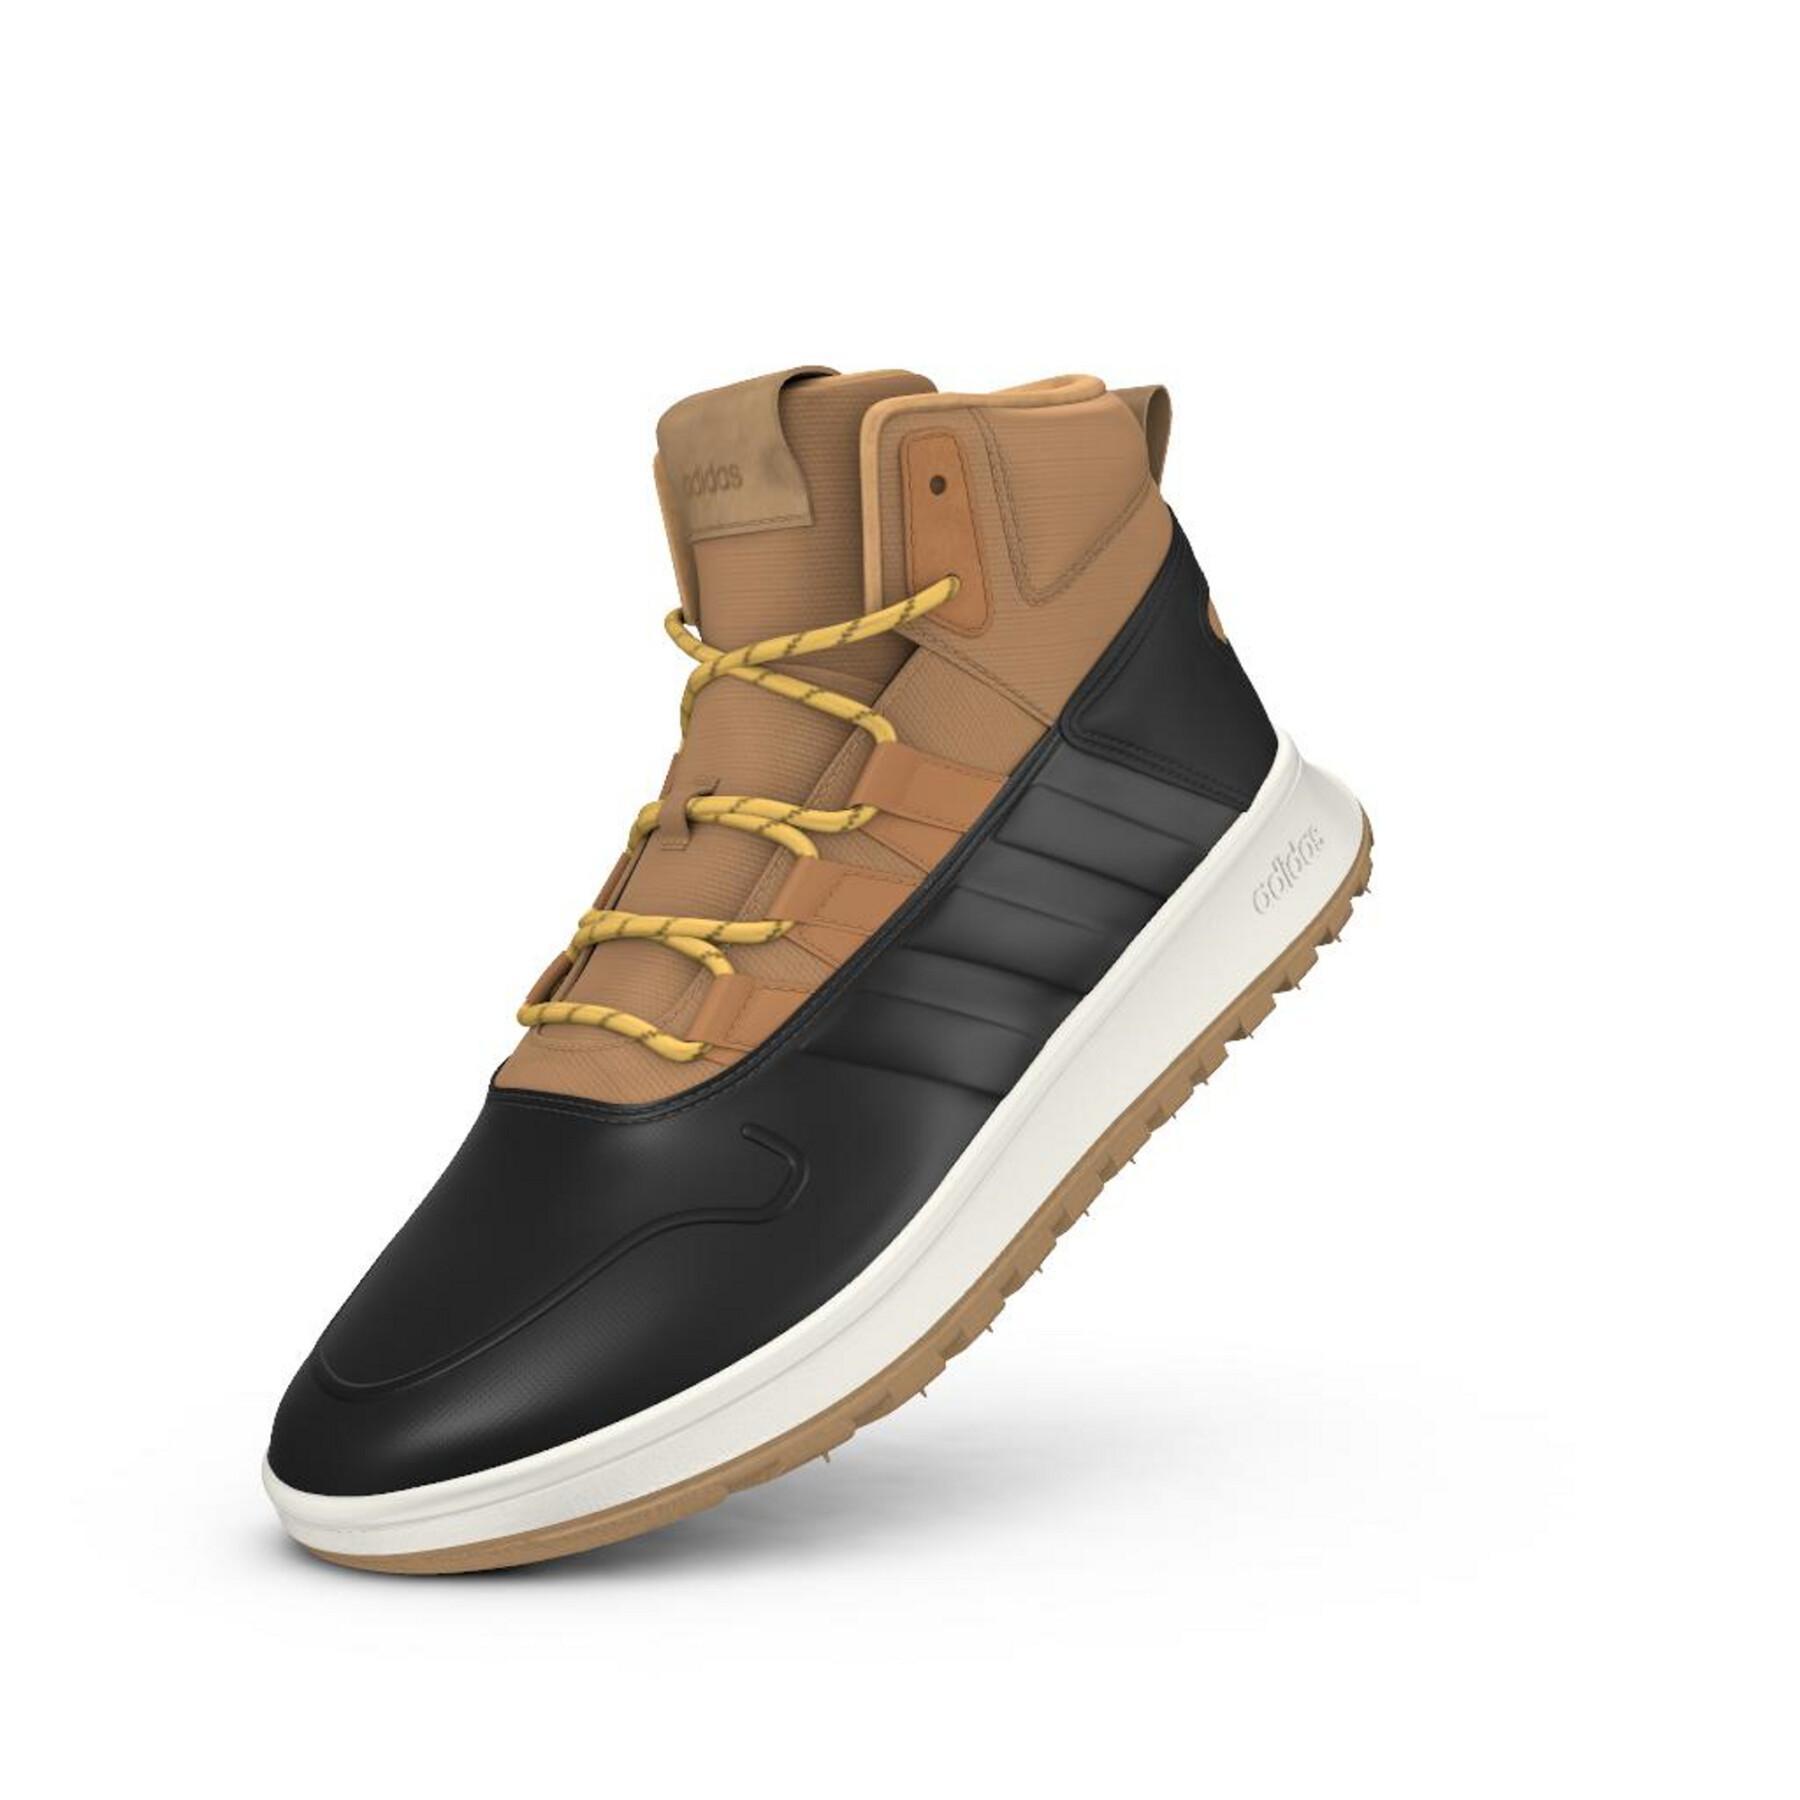 Eastern Specific Editor Indoor shoes adidas Fusion Winter